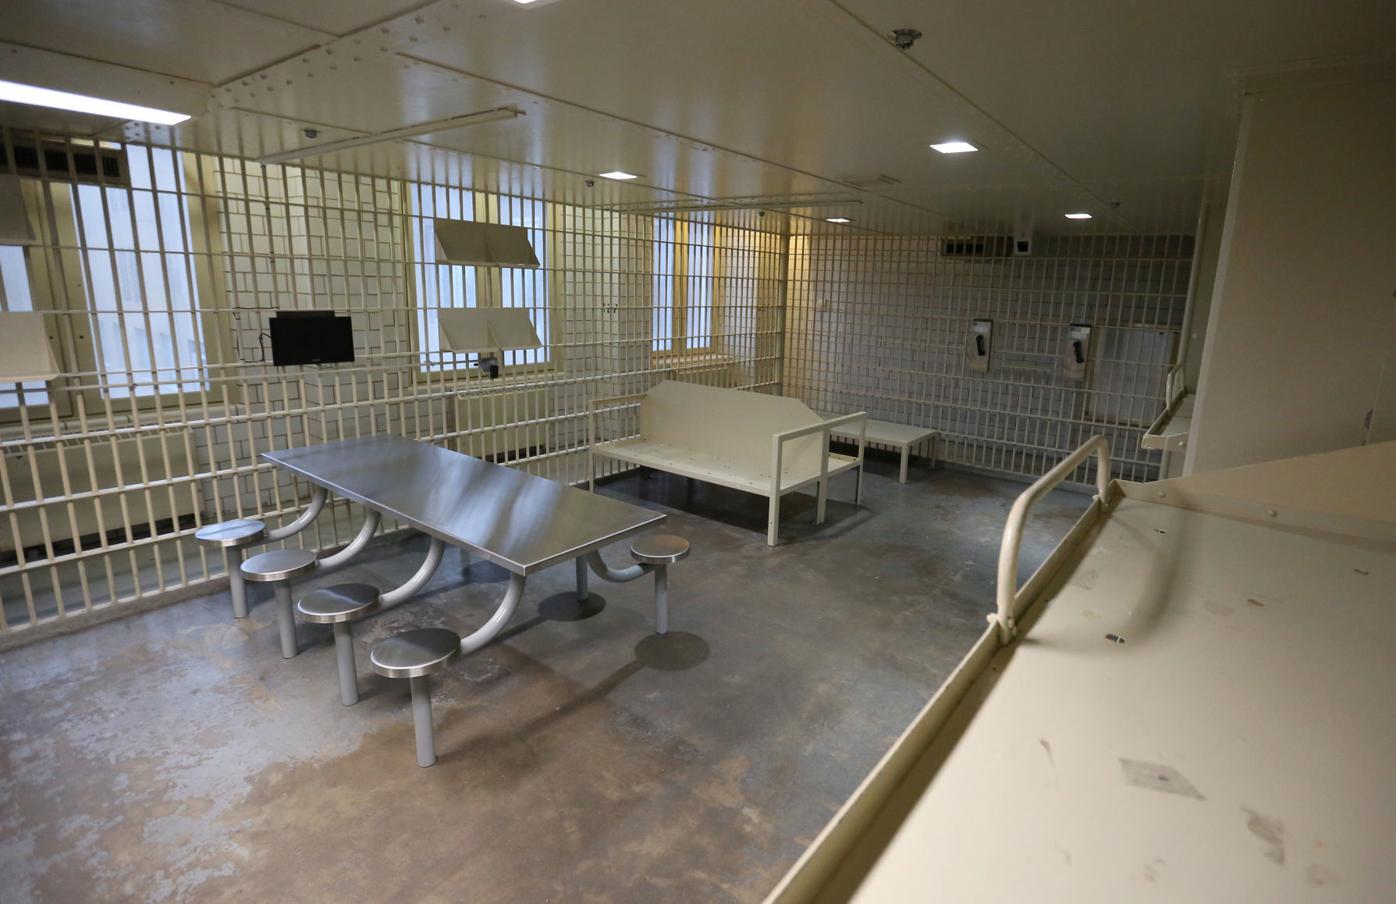 Justice Center jail adds body scanner to try to detect contraband